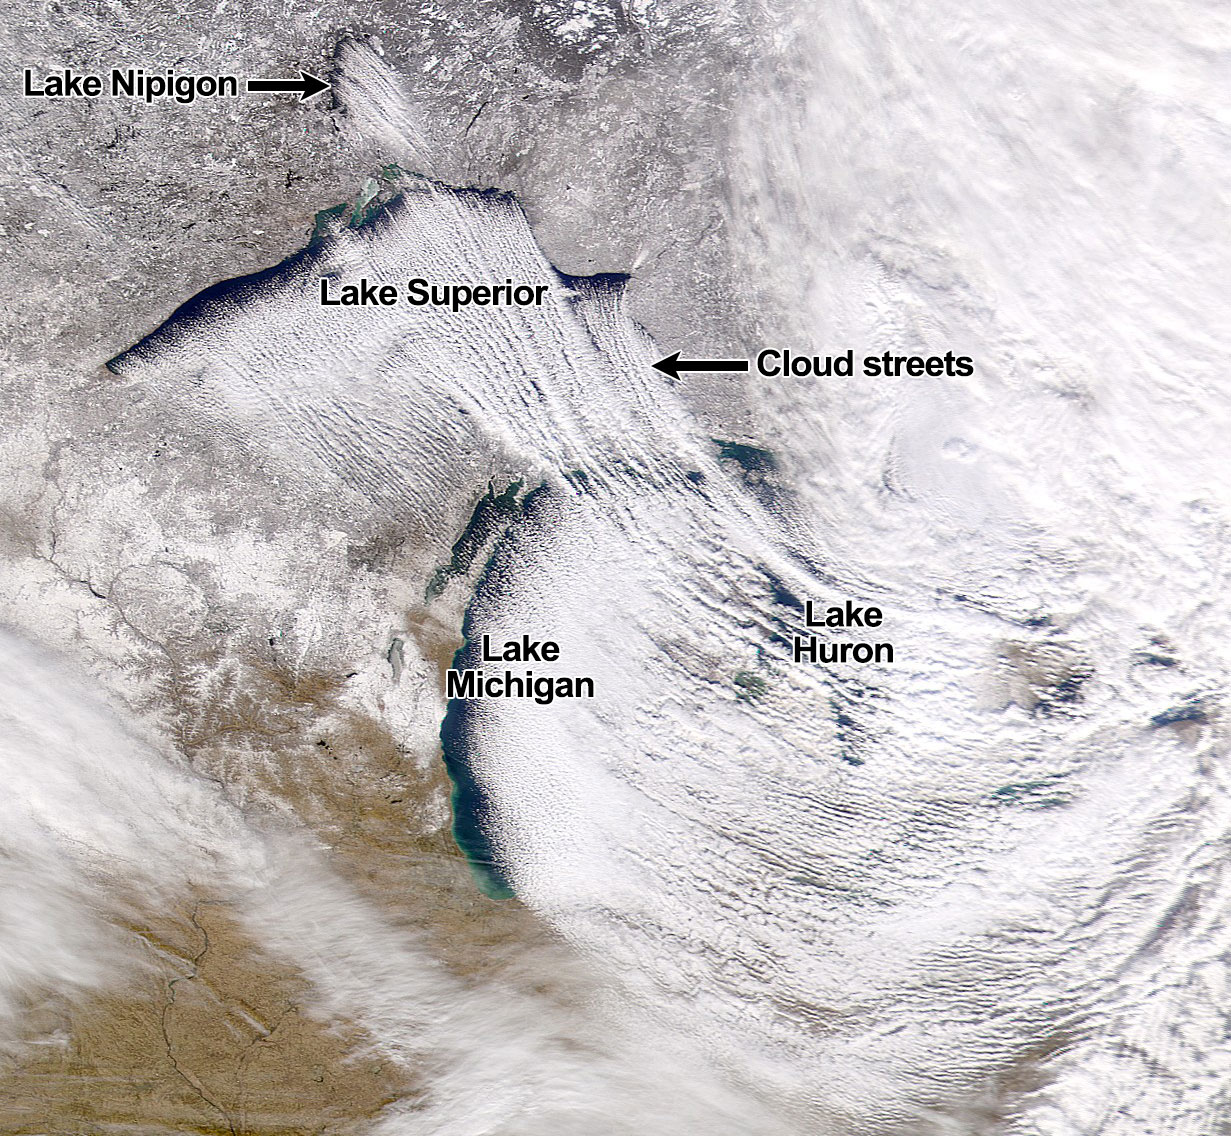 Satellite photo fo the Great Lakes region during the winter with lakes Superior, Michigan, and Huron labeled, as well as Lake Nipigon to the north of Lake Superior; lakes Erie and Ontario and obscured by clouds. Clouds are streaming from above the Great Lakes in curved parallel rows traveling to the southeast. These clouds carry lake-effect snow and are called "cloud streets."